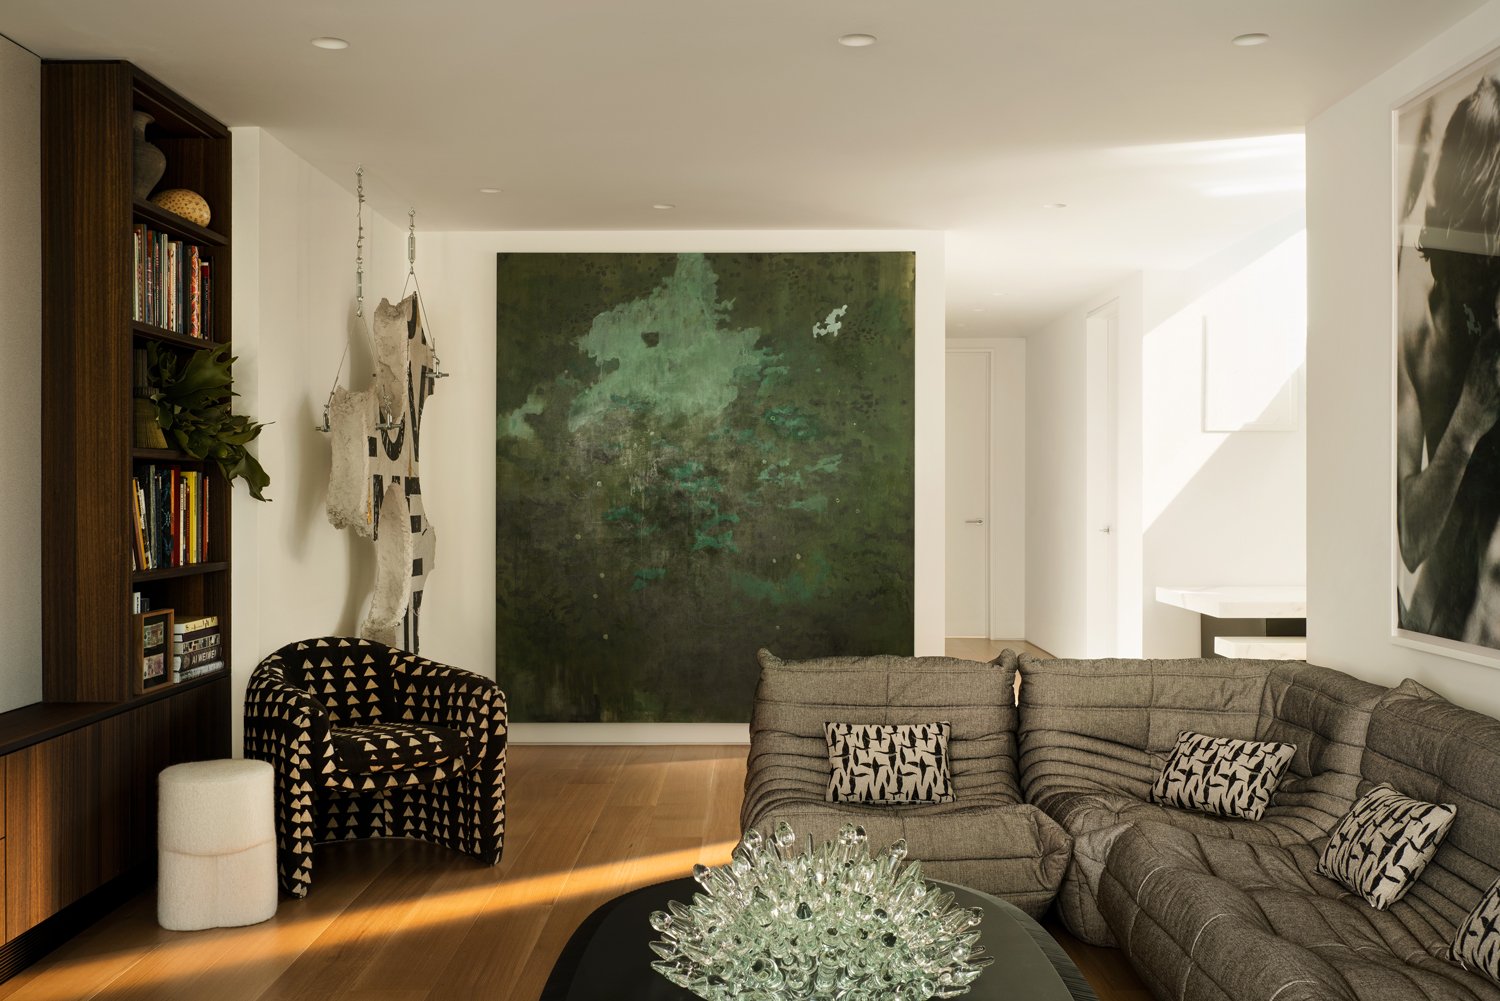  An ethereal canvas by Santiago Quesnel presides over the living area, which also includes a suspended work by Ivan Argote.    Elizabeth Carababas   